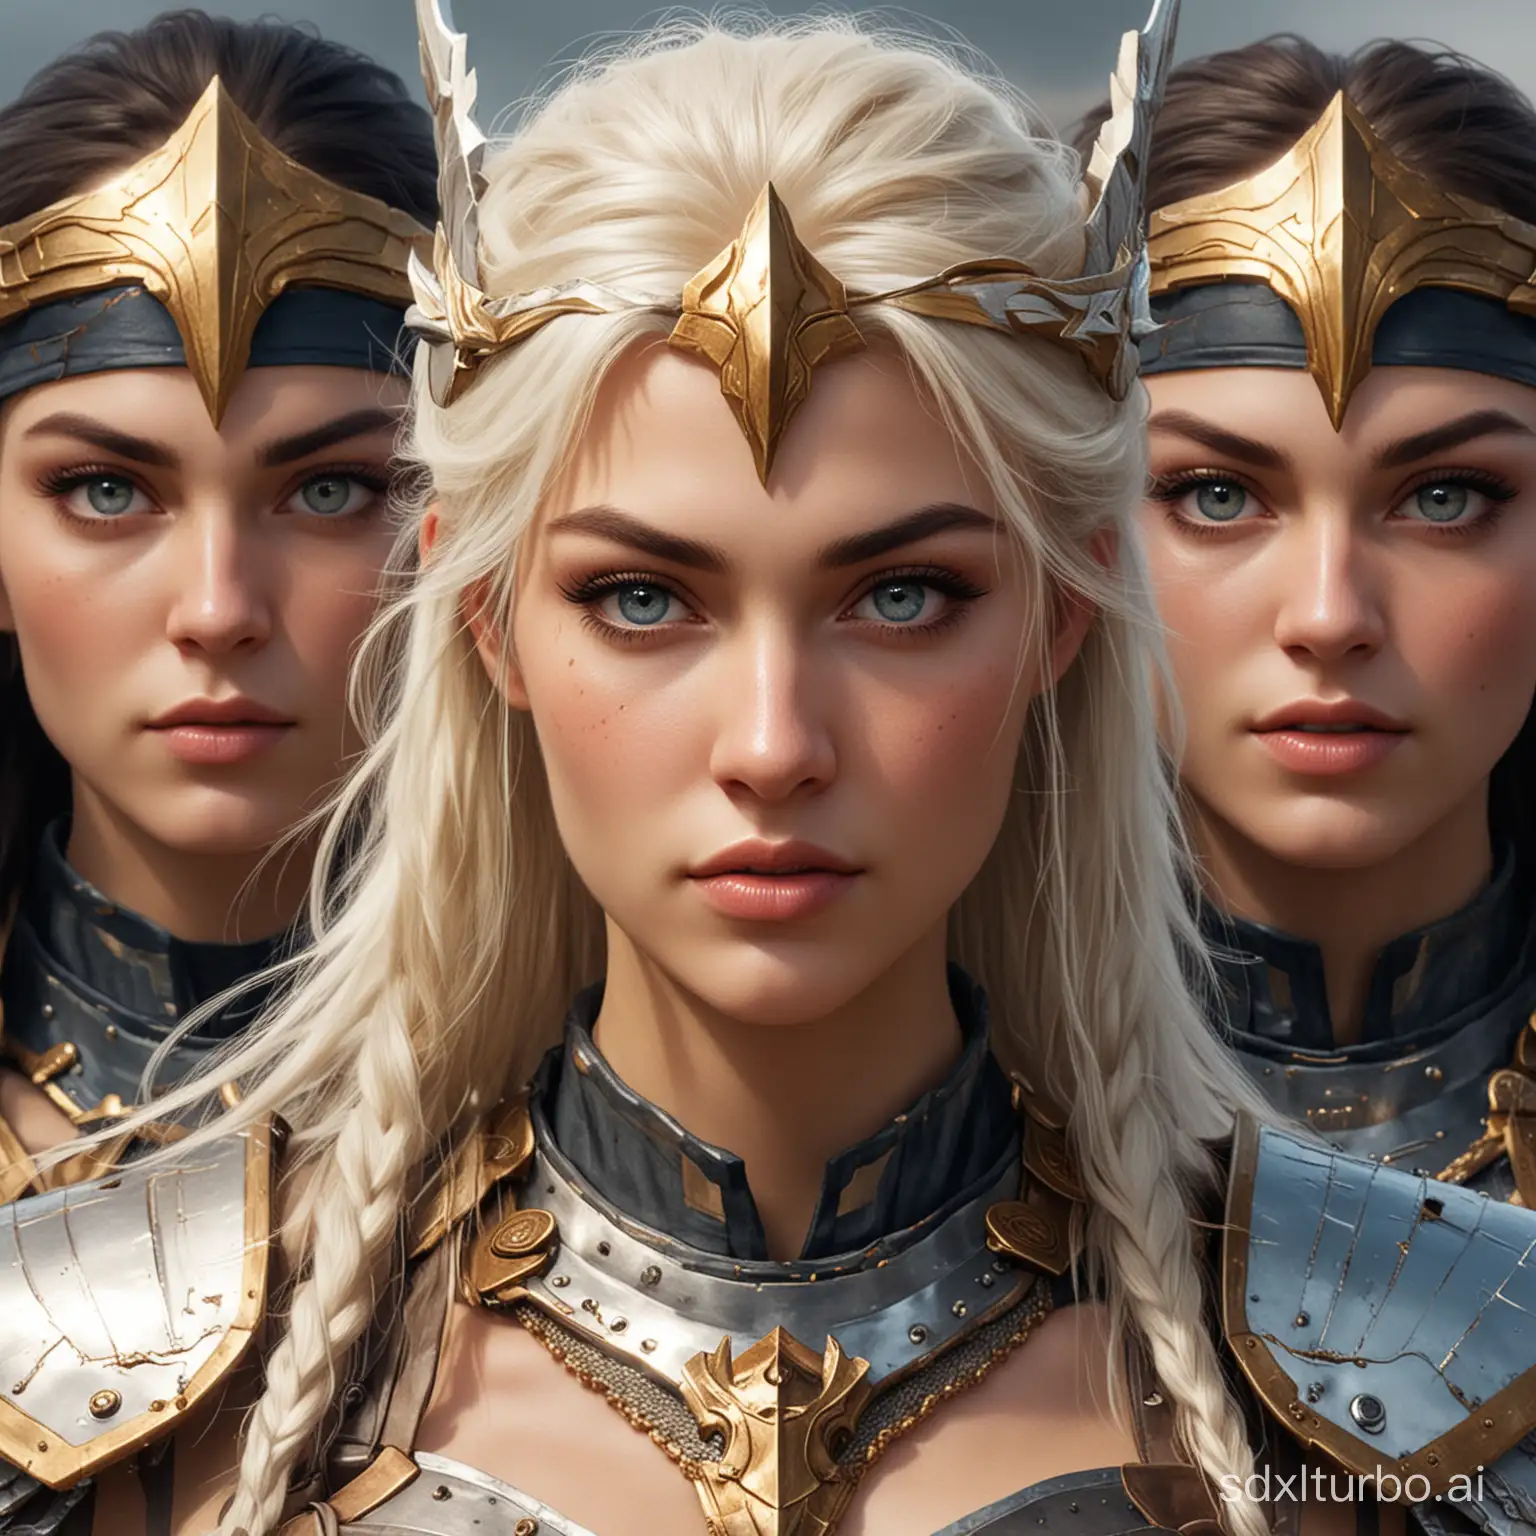 beautiful faces of valkyries